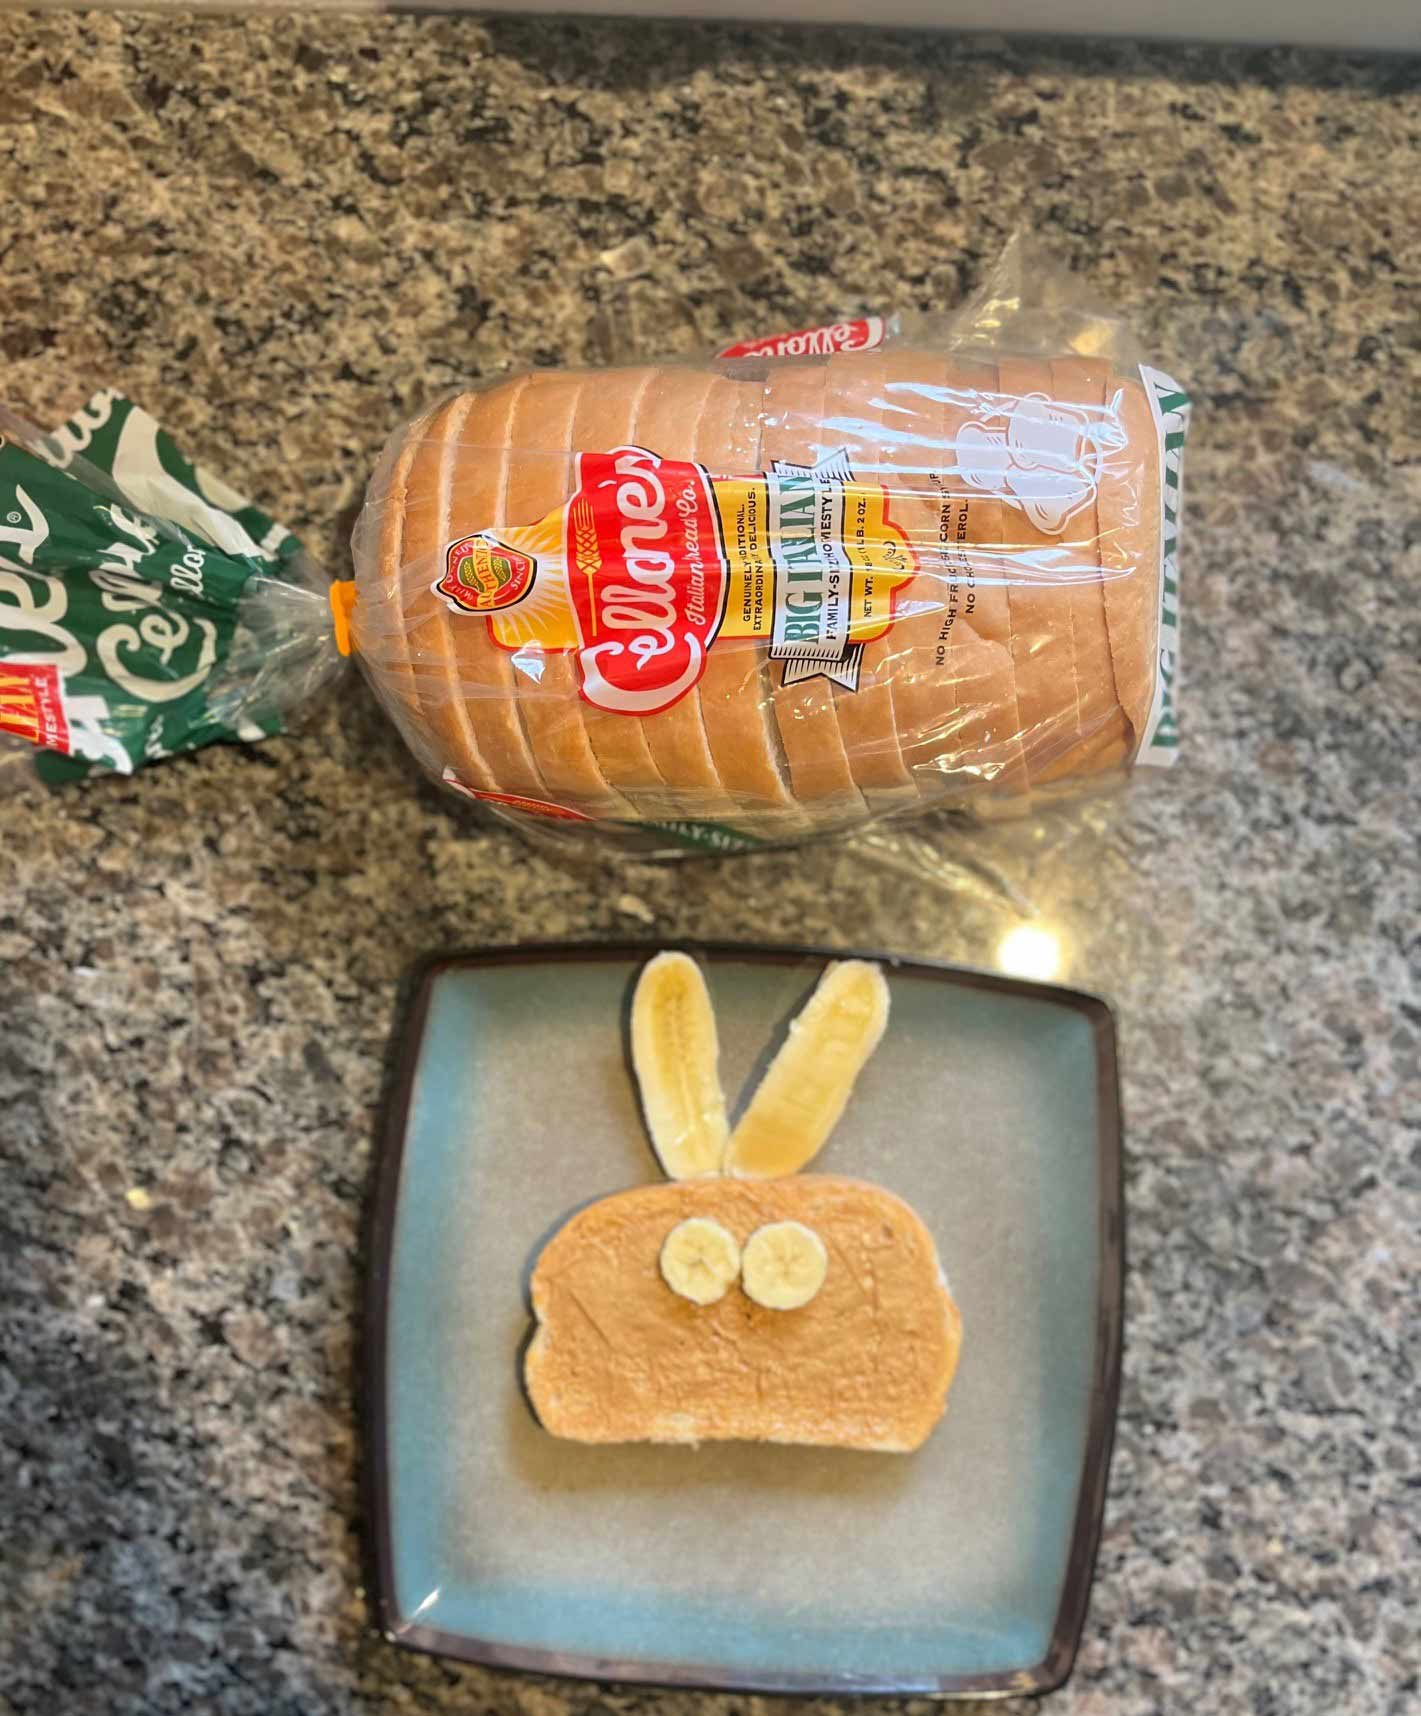 Bread with two banana wheels and bunny ears